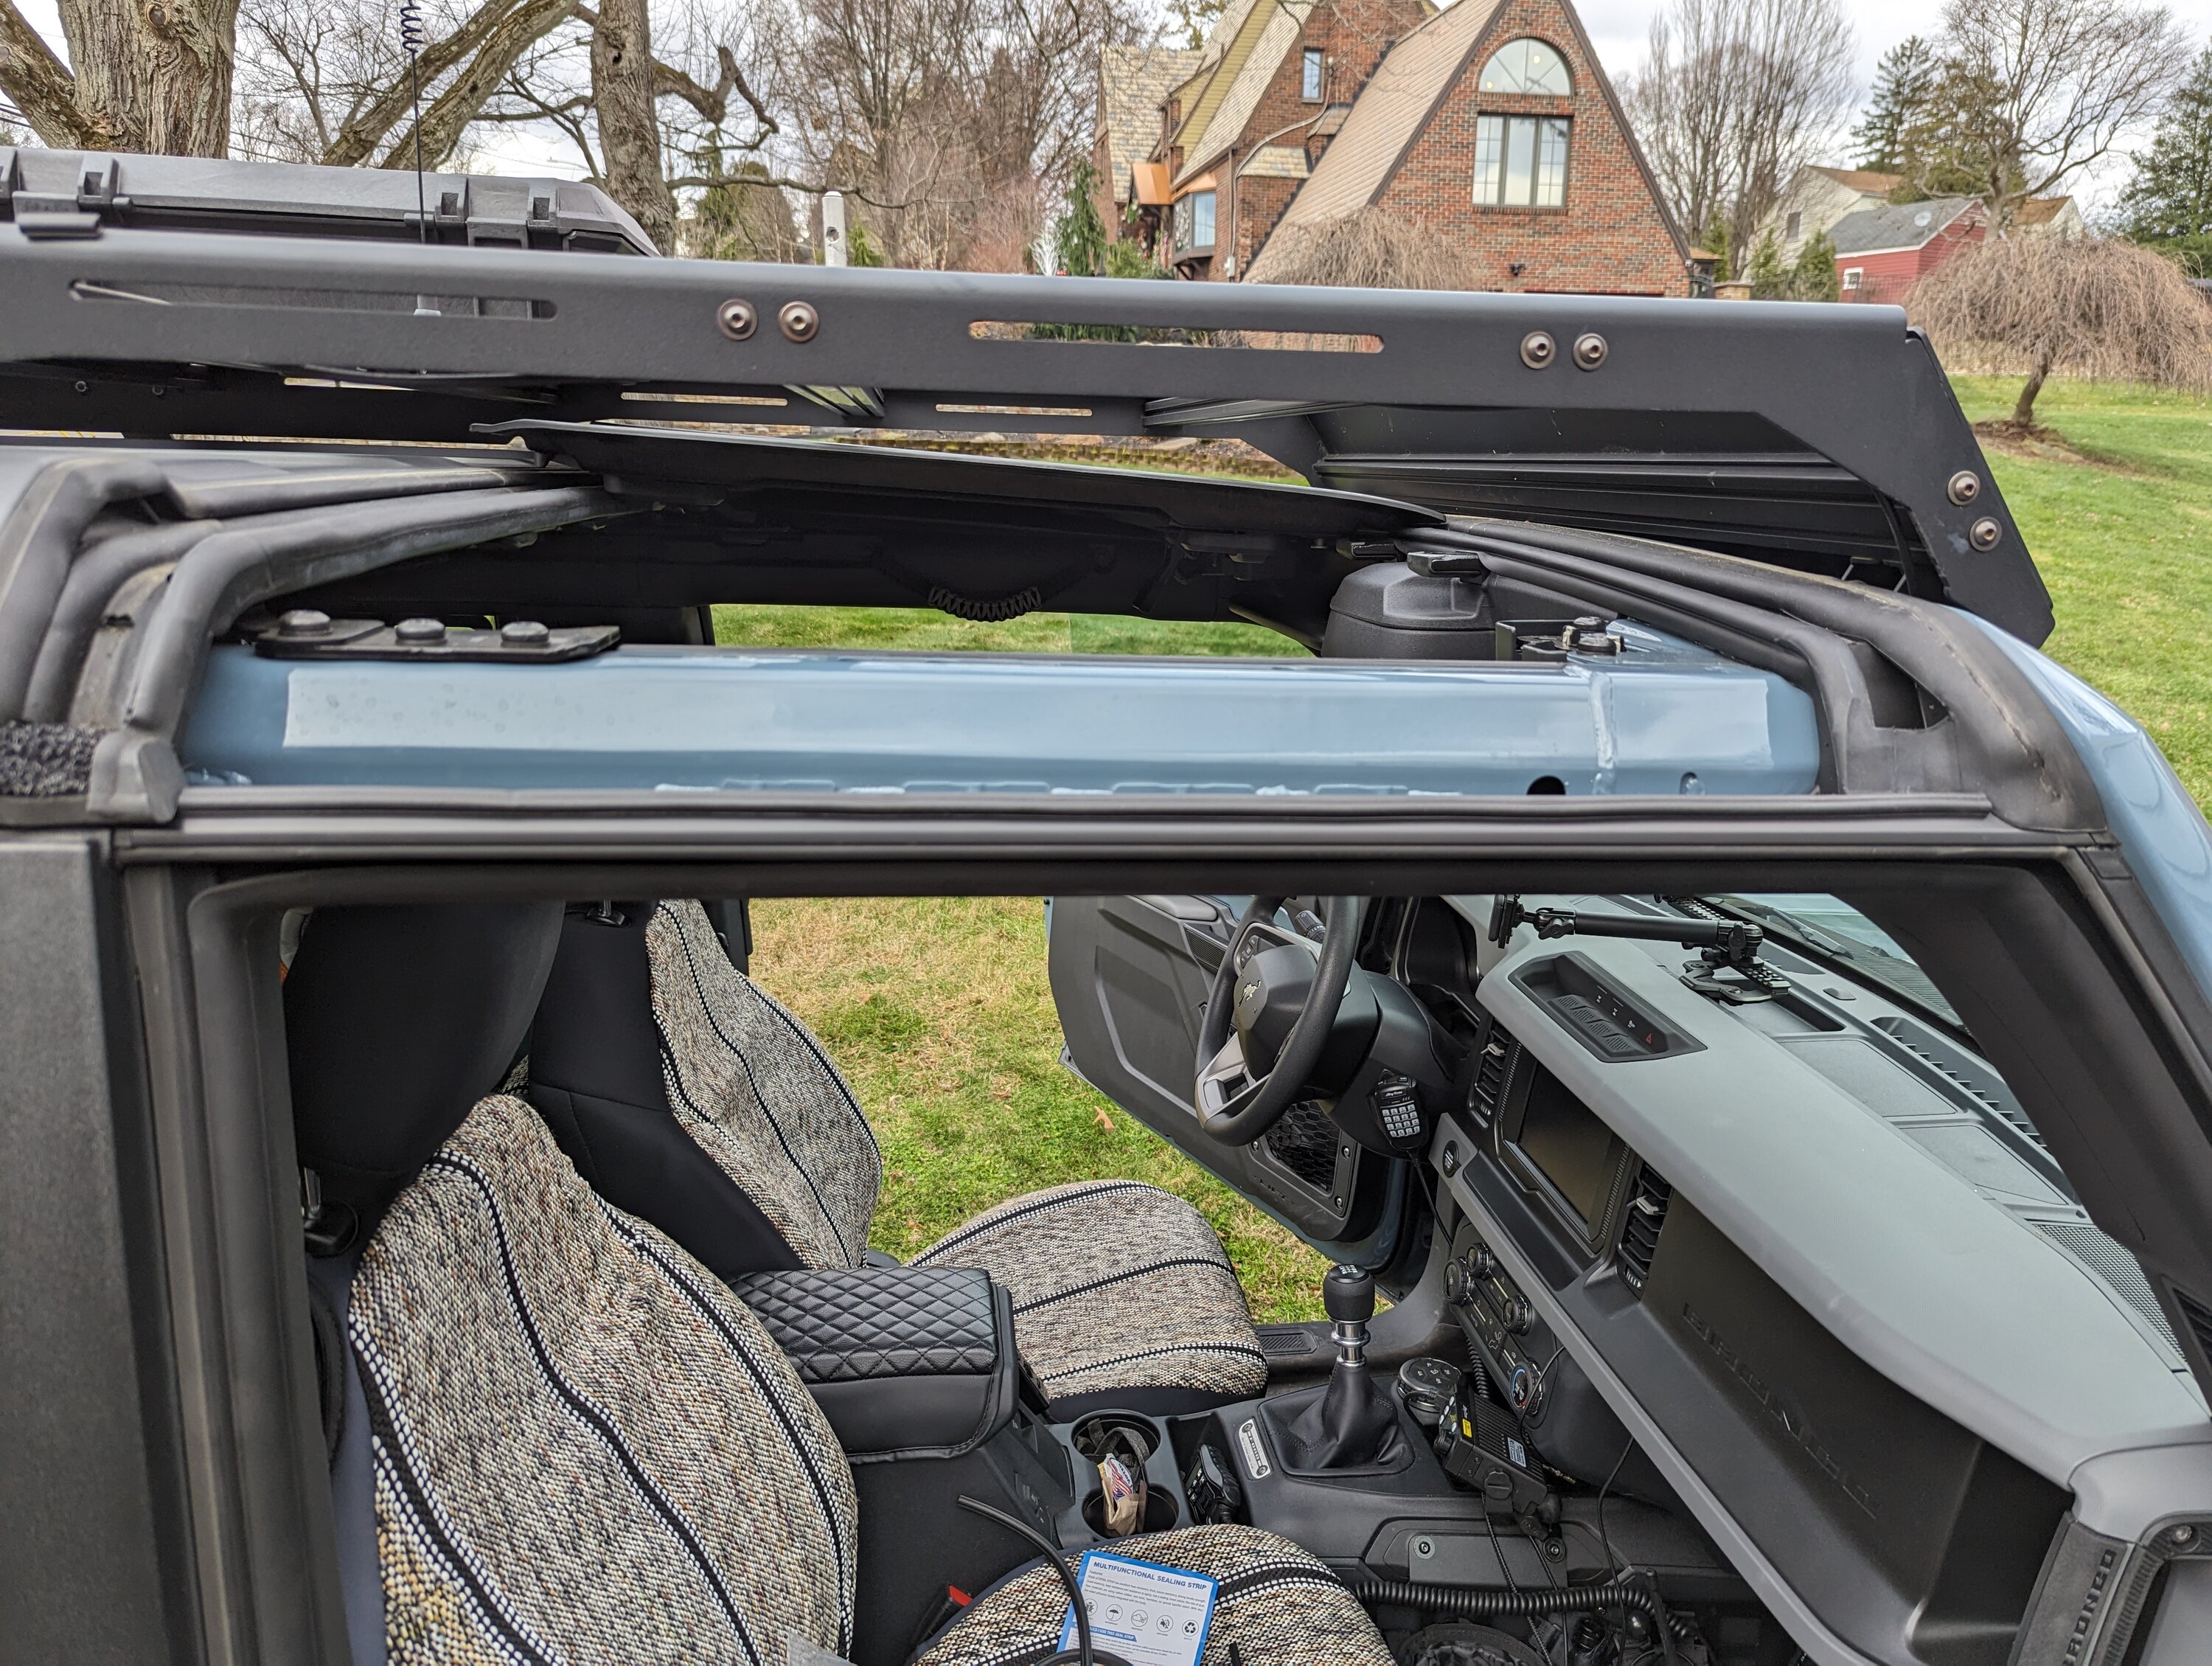 Ford Bronco MIC Hard Top Wind Noise Reduction - 2023 Edition - Plus Bonus Fix for Bad Adhesive PXL_20231202_202458766